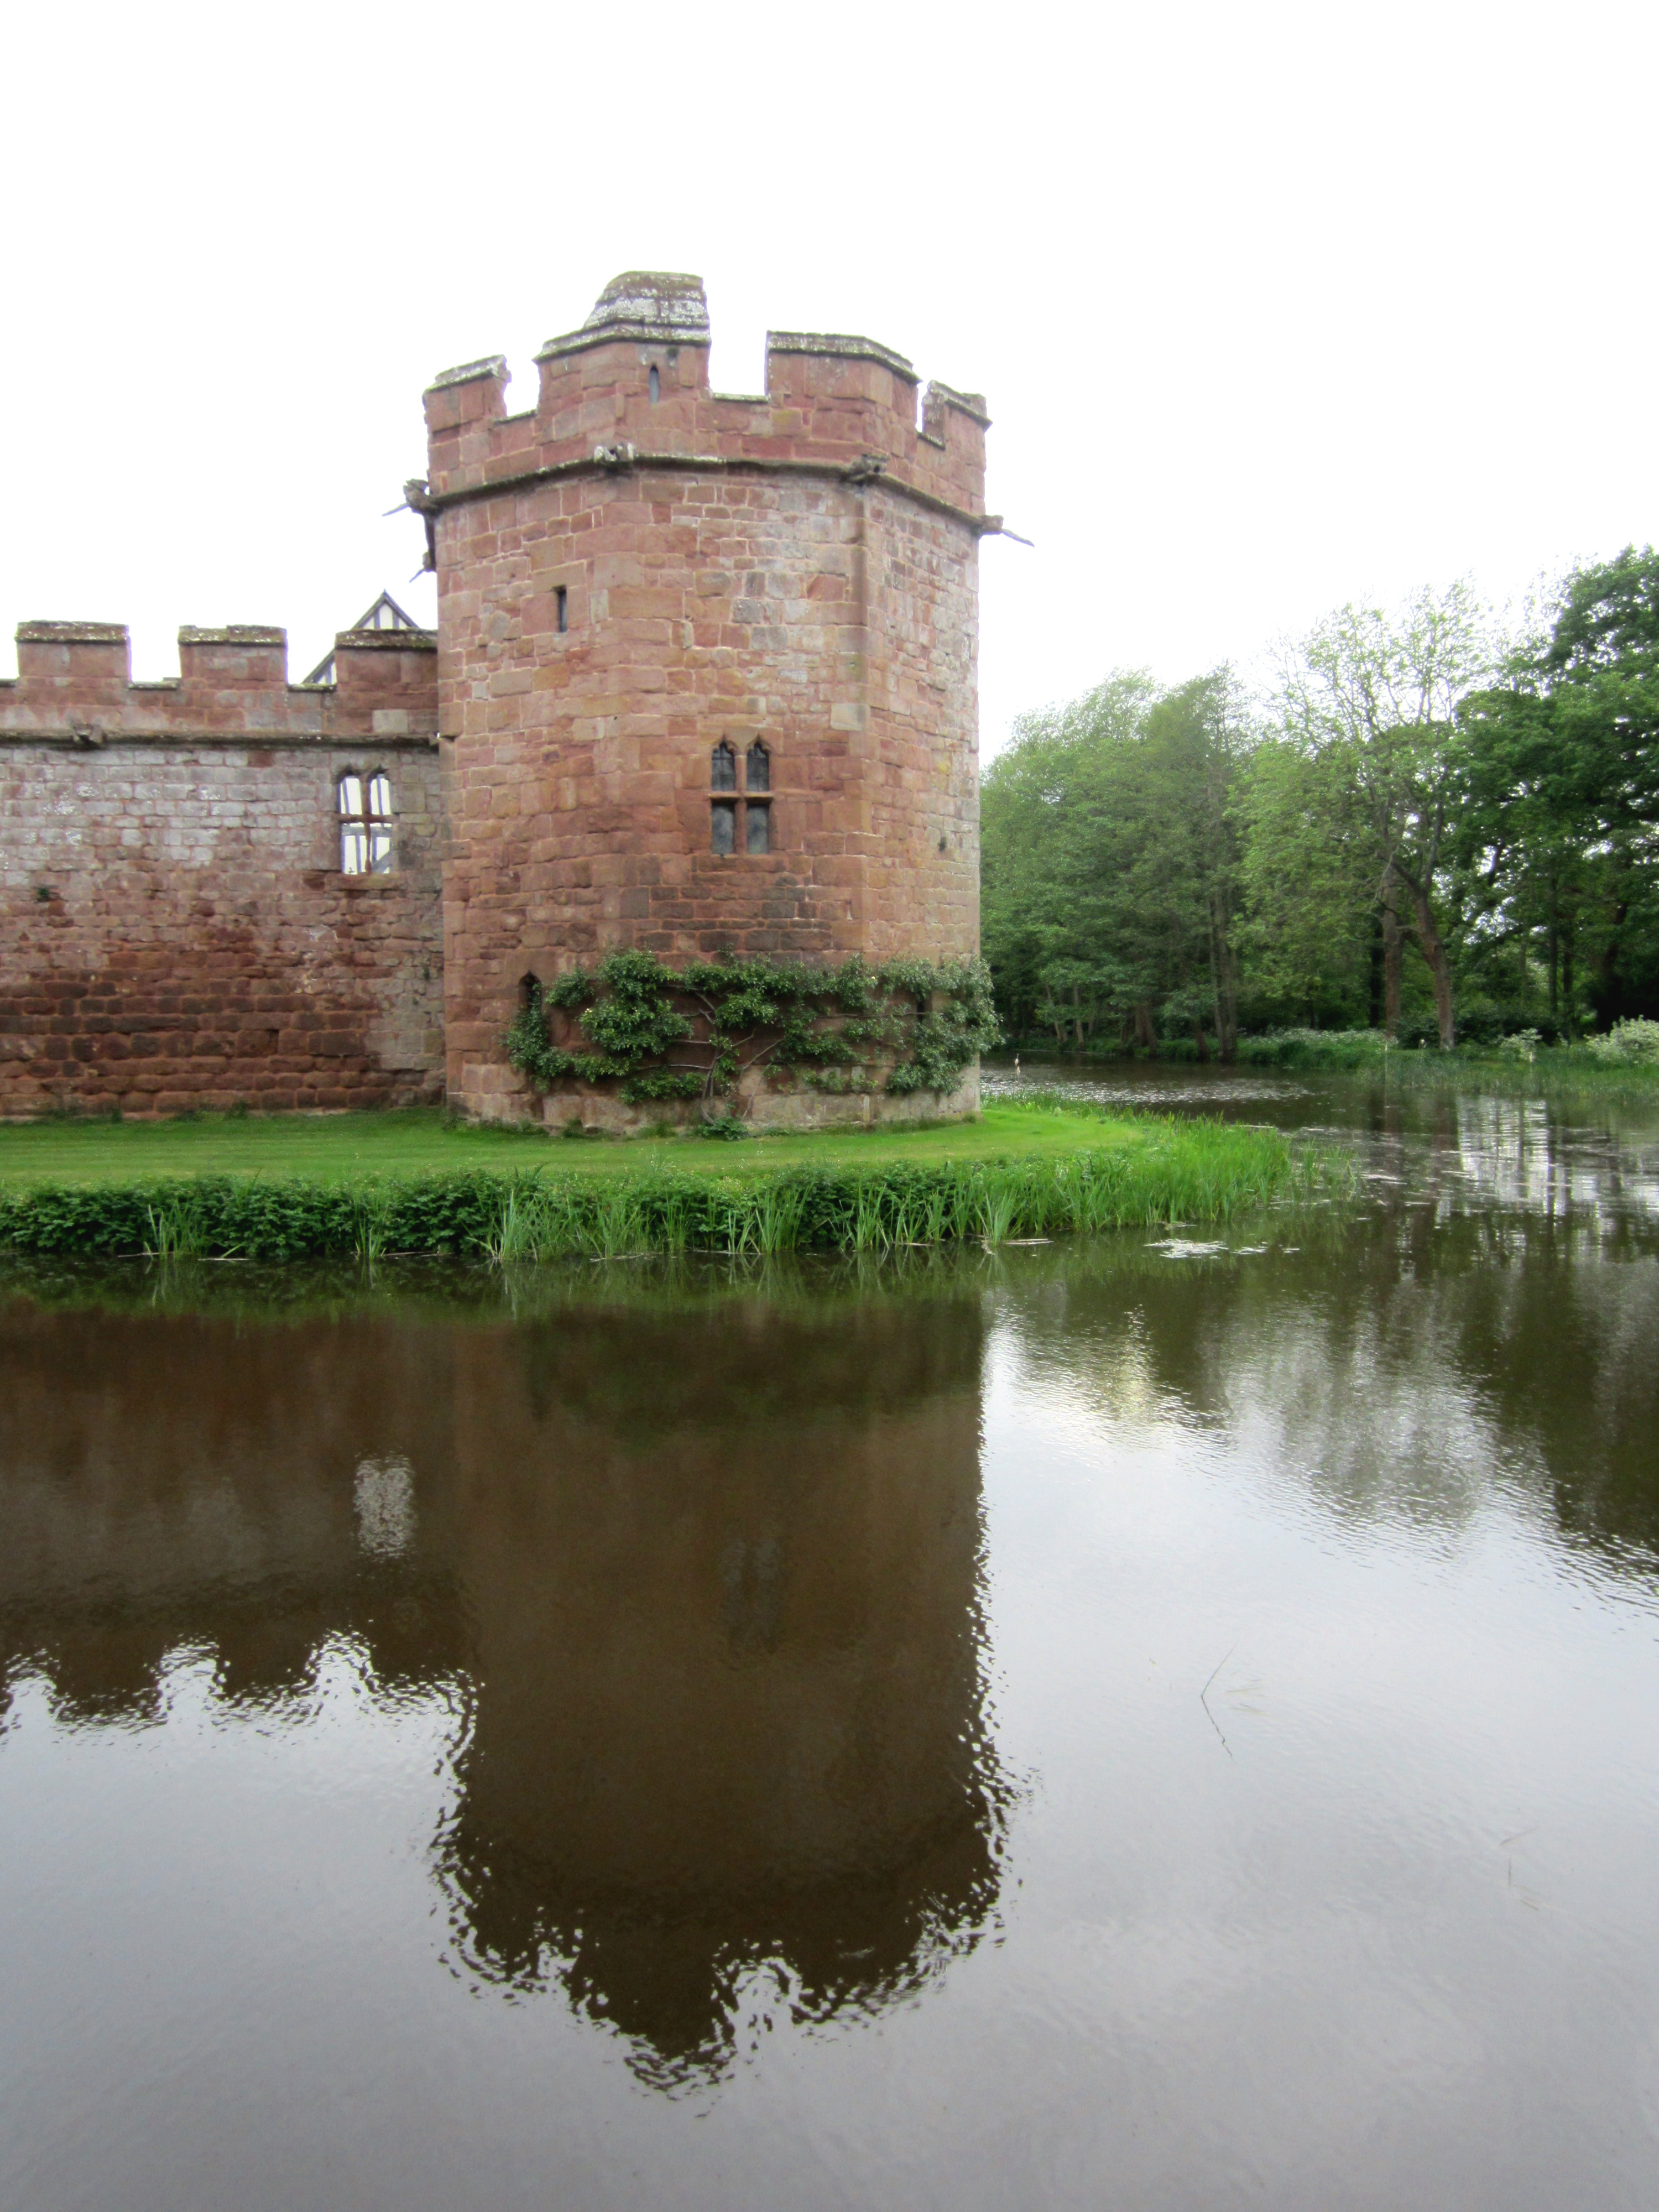 Moat at Maxstoke Castle - Our Warwickshire